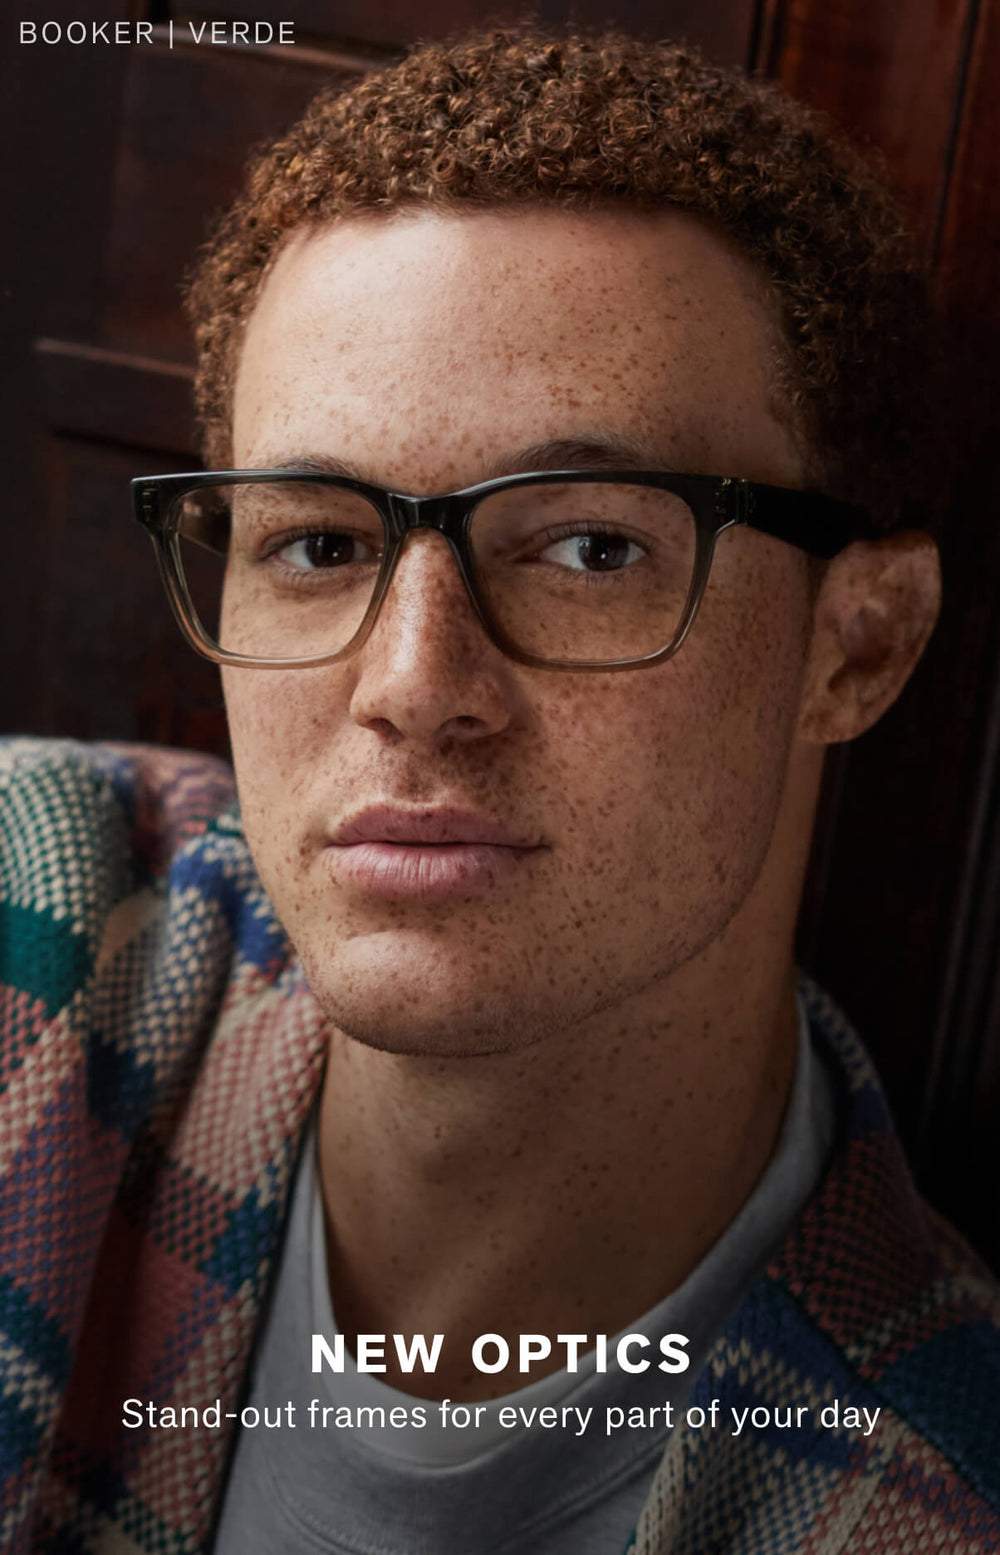 New optics. Stand-out frames for every part of your day